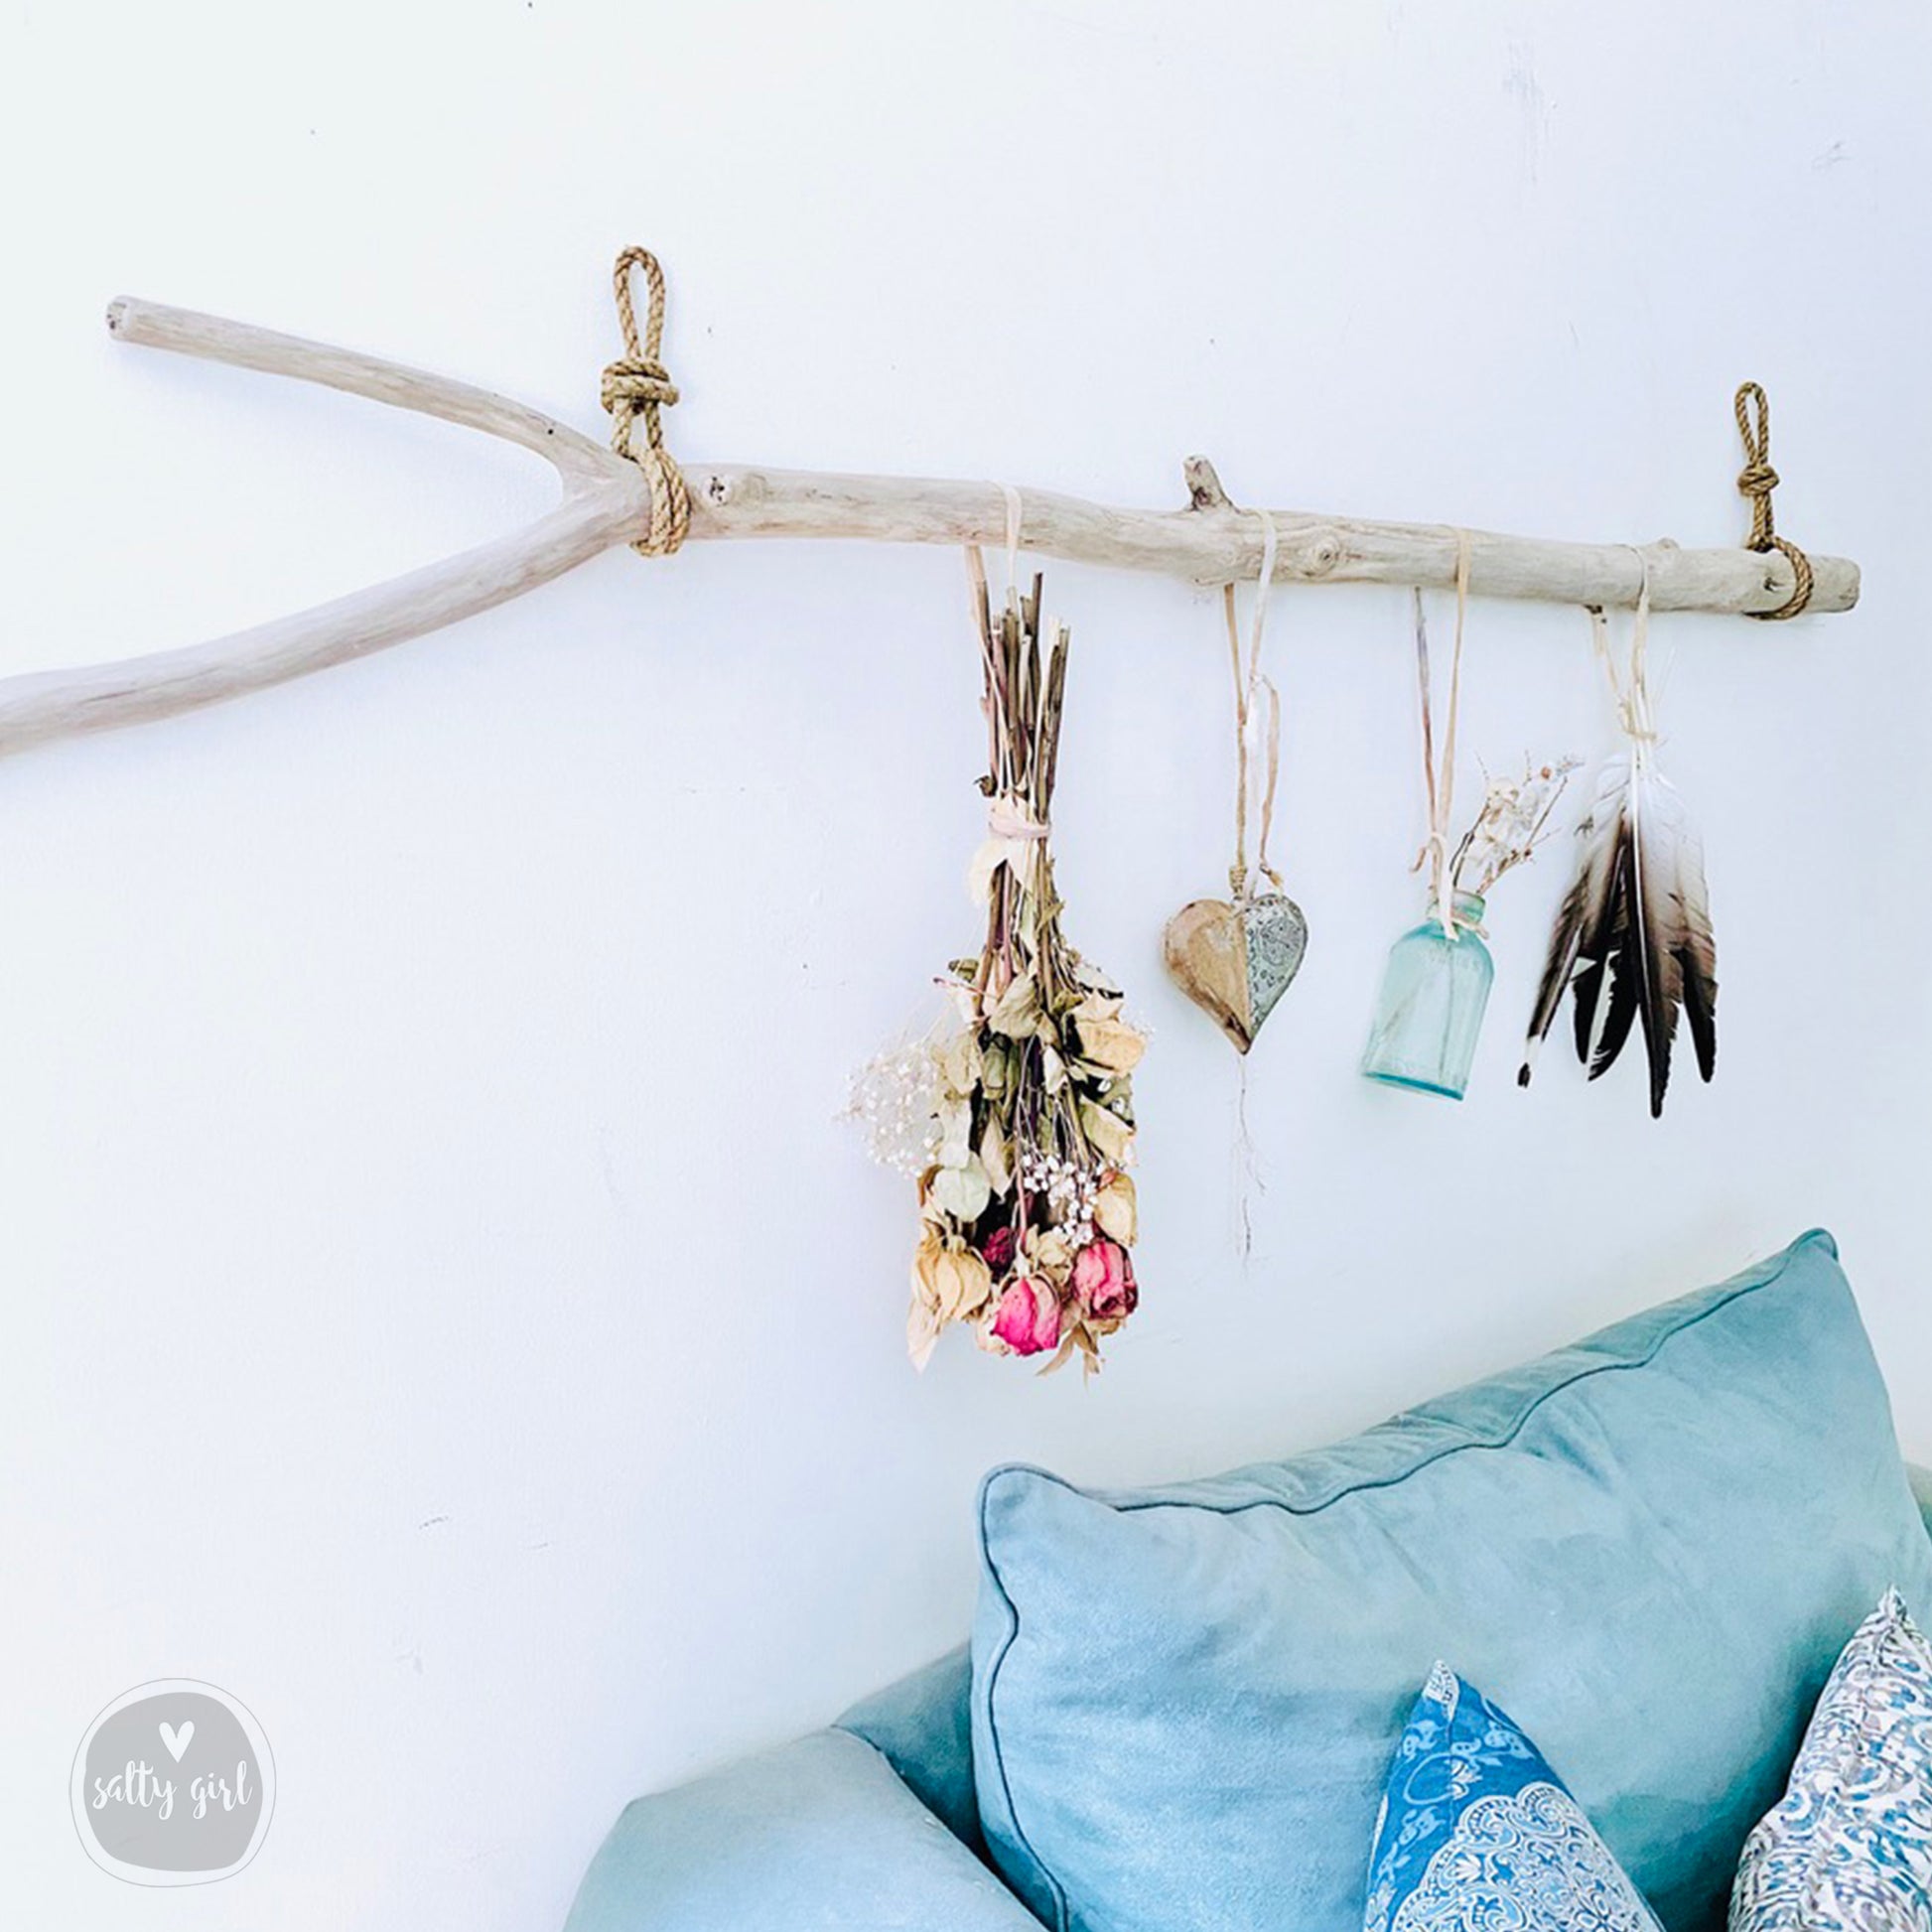 Driftwood Branch with Rope Hangers - Coastal Wall Decor – Maine Salty Girl